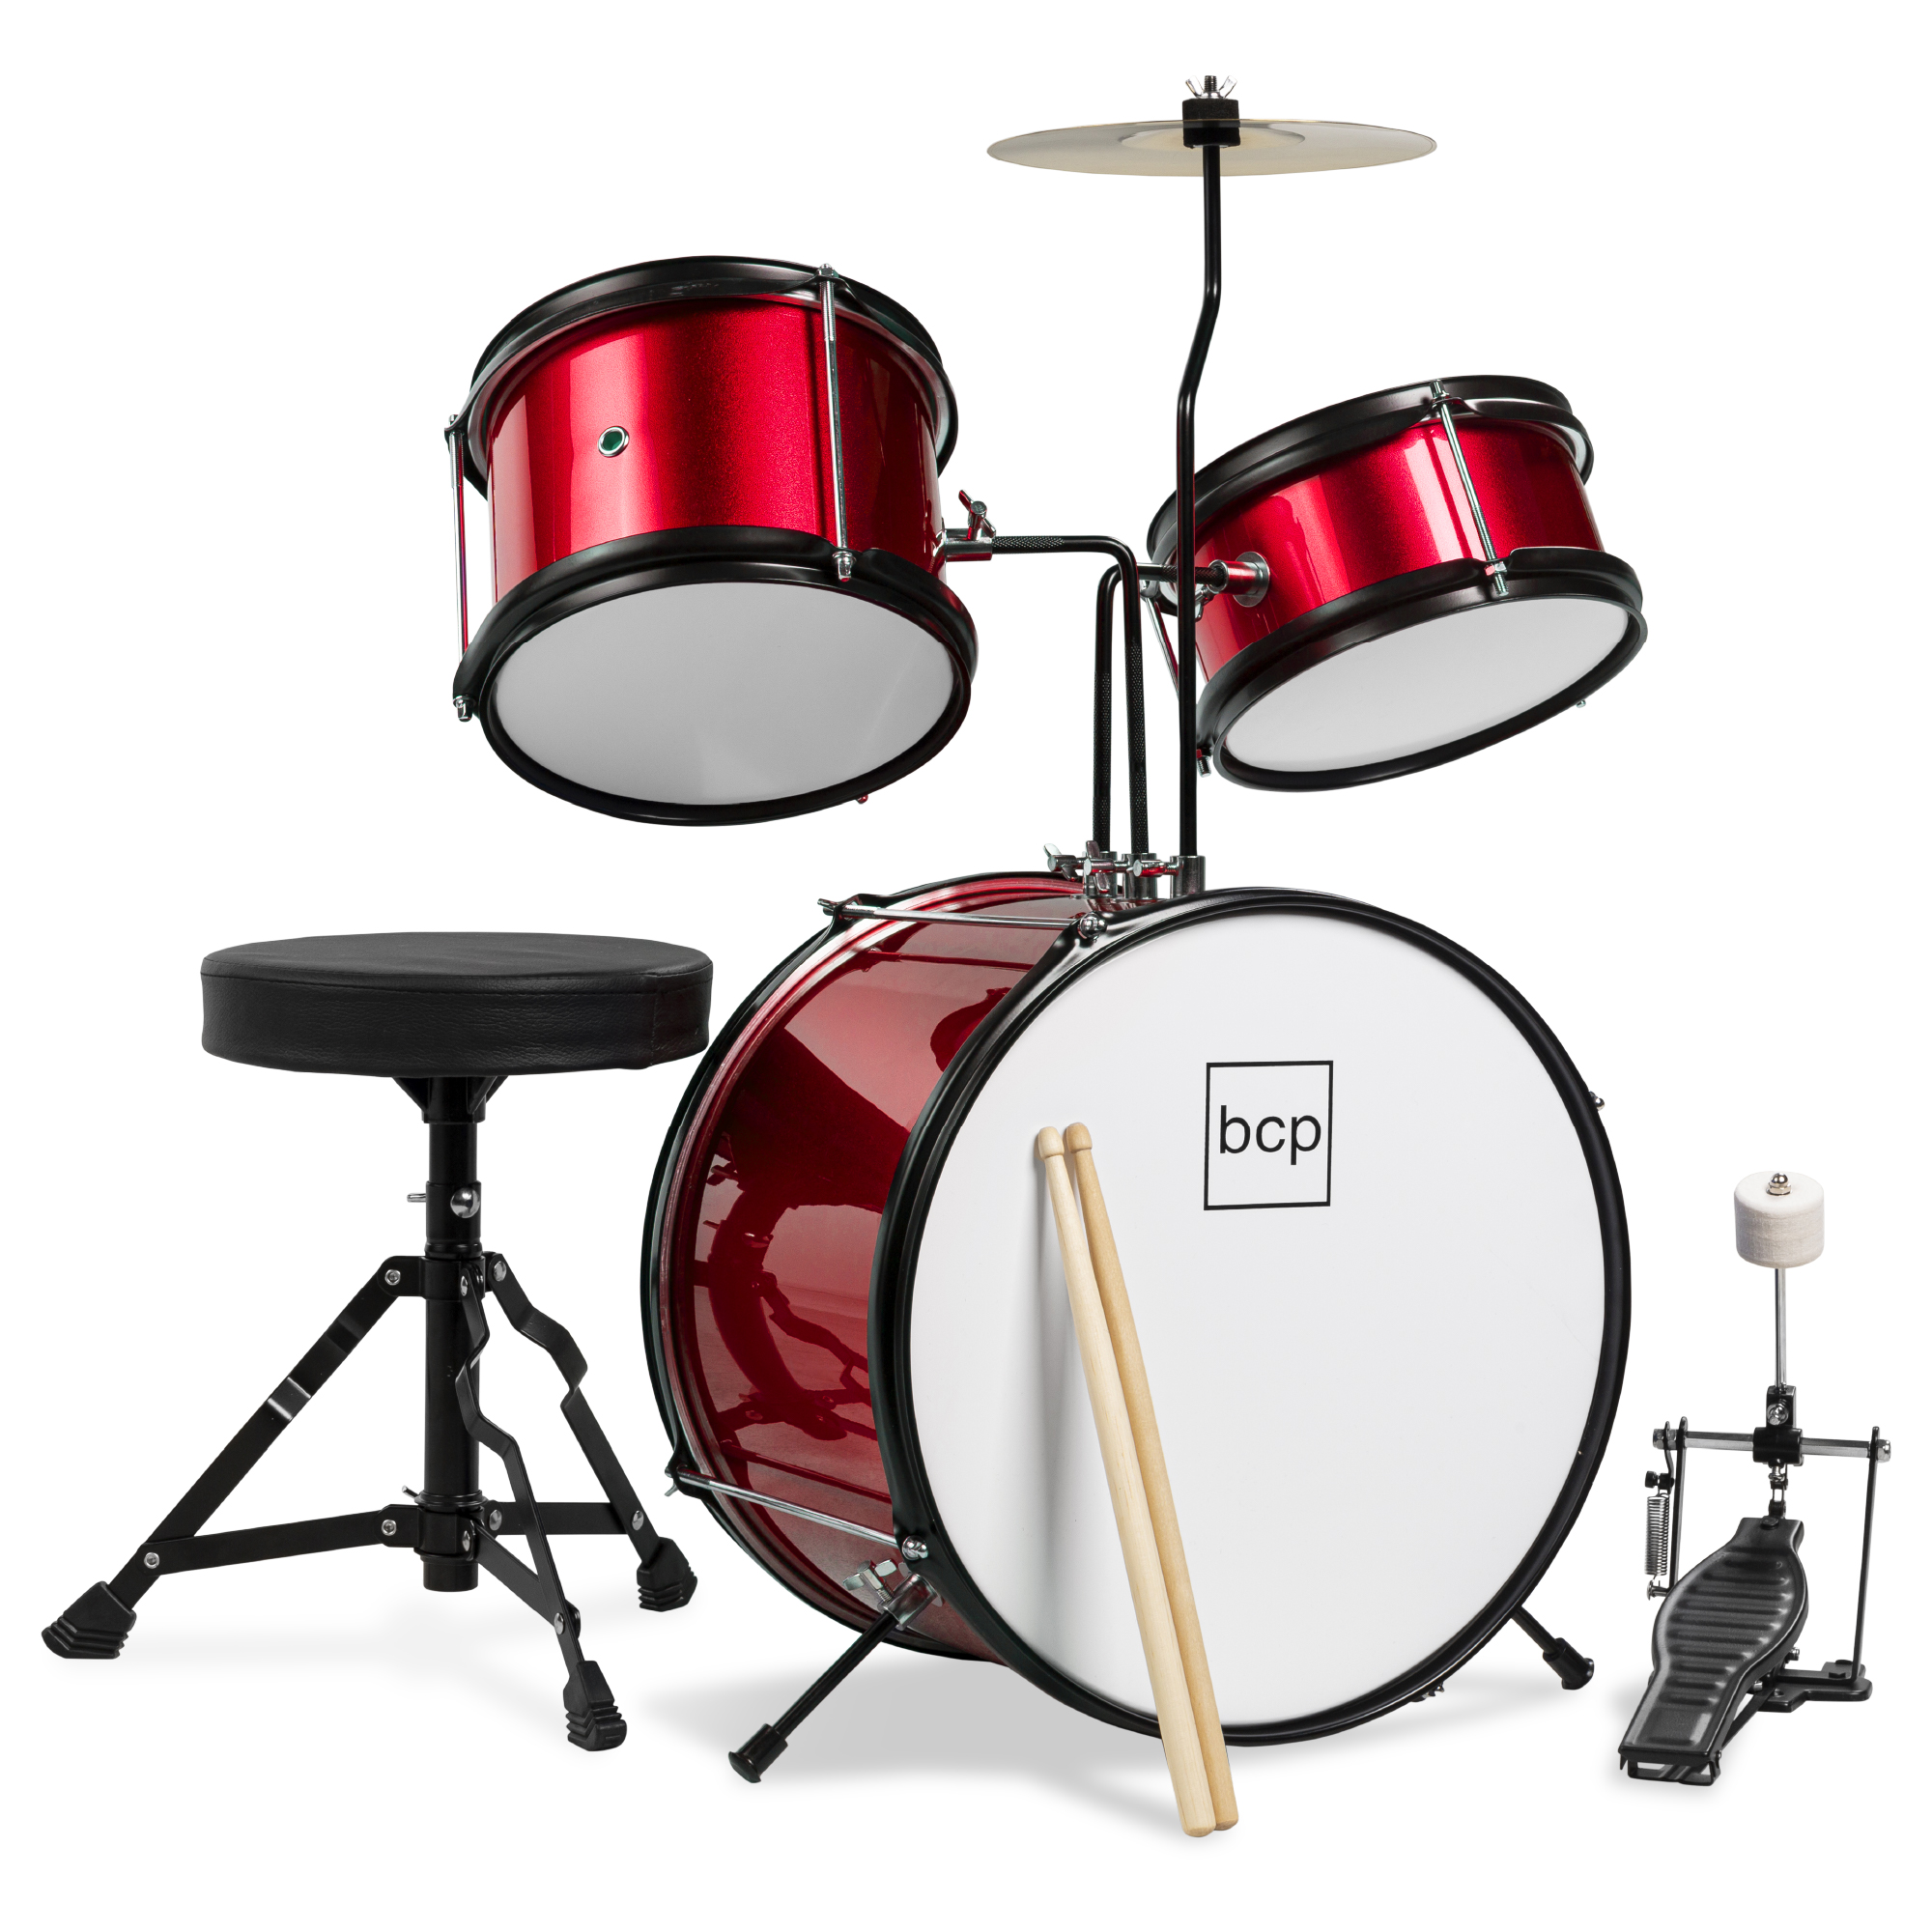 Best Choice Products Kids Beginner 3-Piece Drum, Musical Instrument Set w/ Sticks, Cushioned Stool, Drum Pedal - Red - image 1 of 6